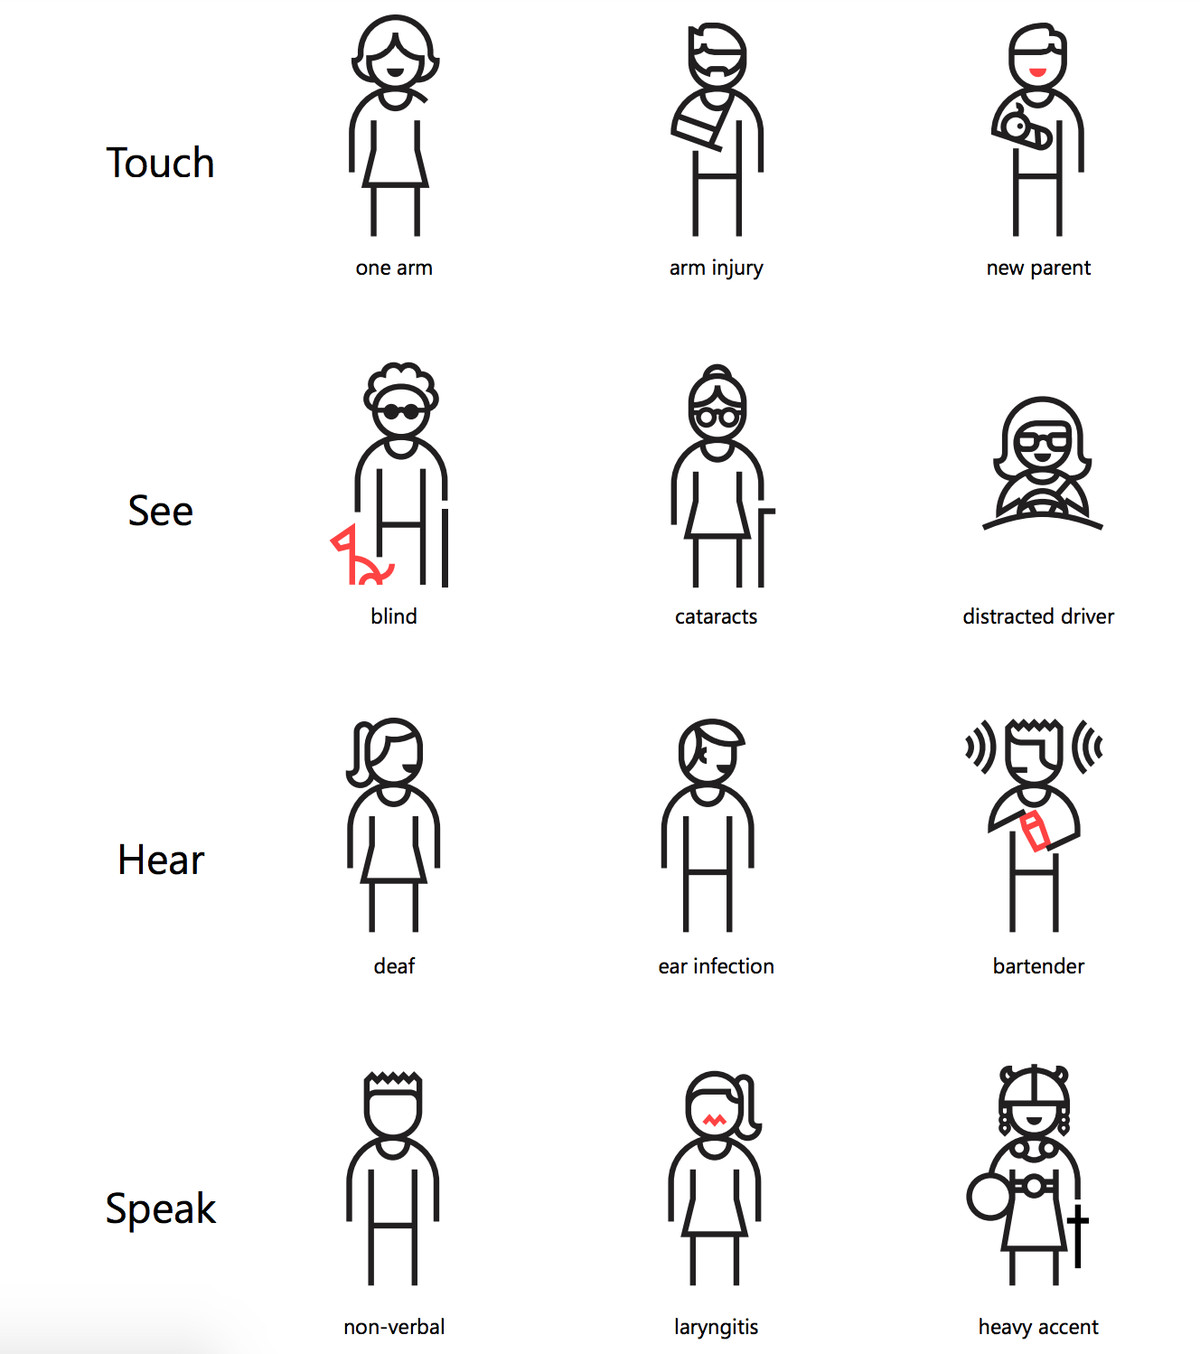 Graphic showing how four categories of impairments (touch, see, hear, and speak) apply to users in mild, moderate, and severe instances. 